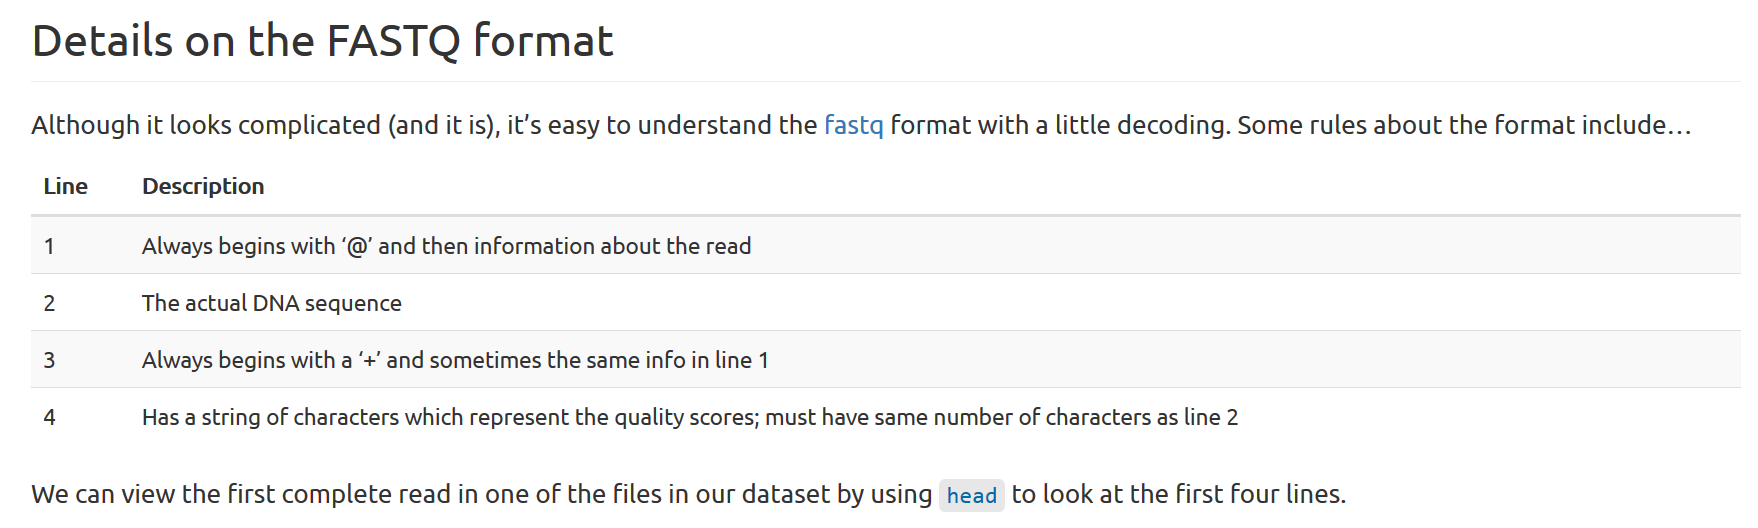 The fastq format has 4 lines for every sequence read